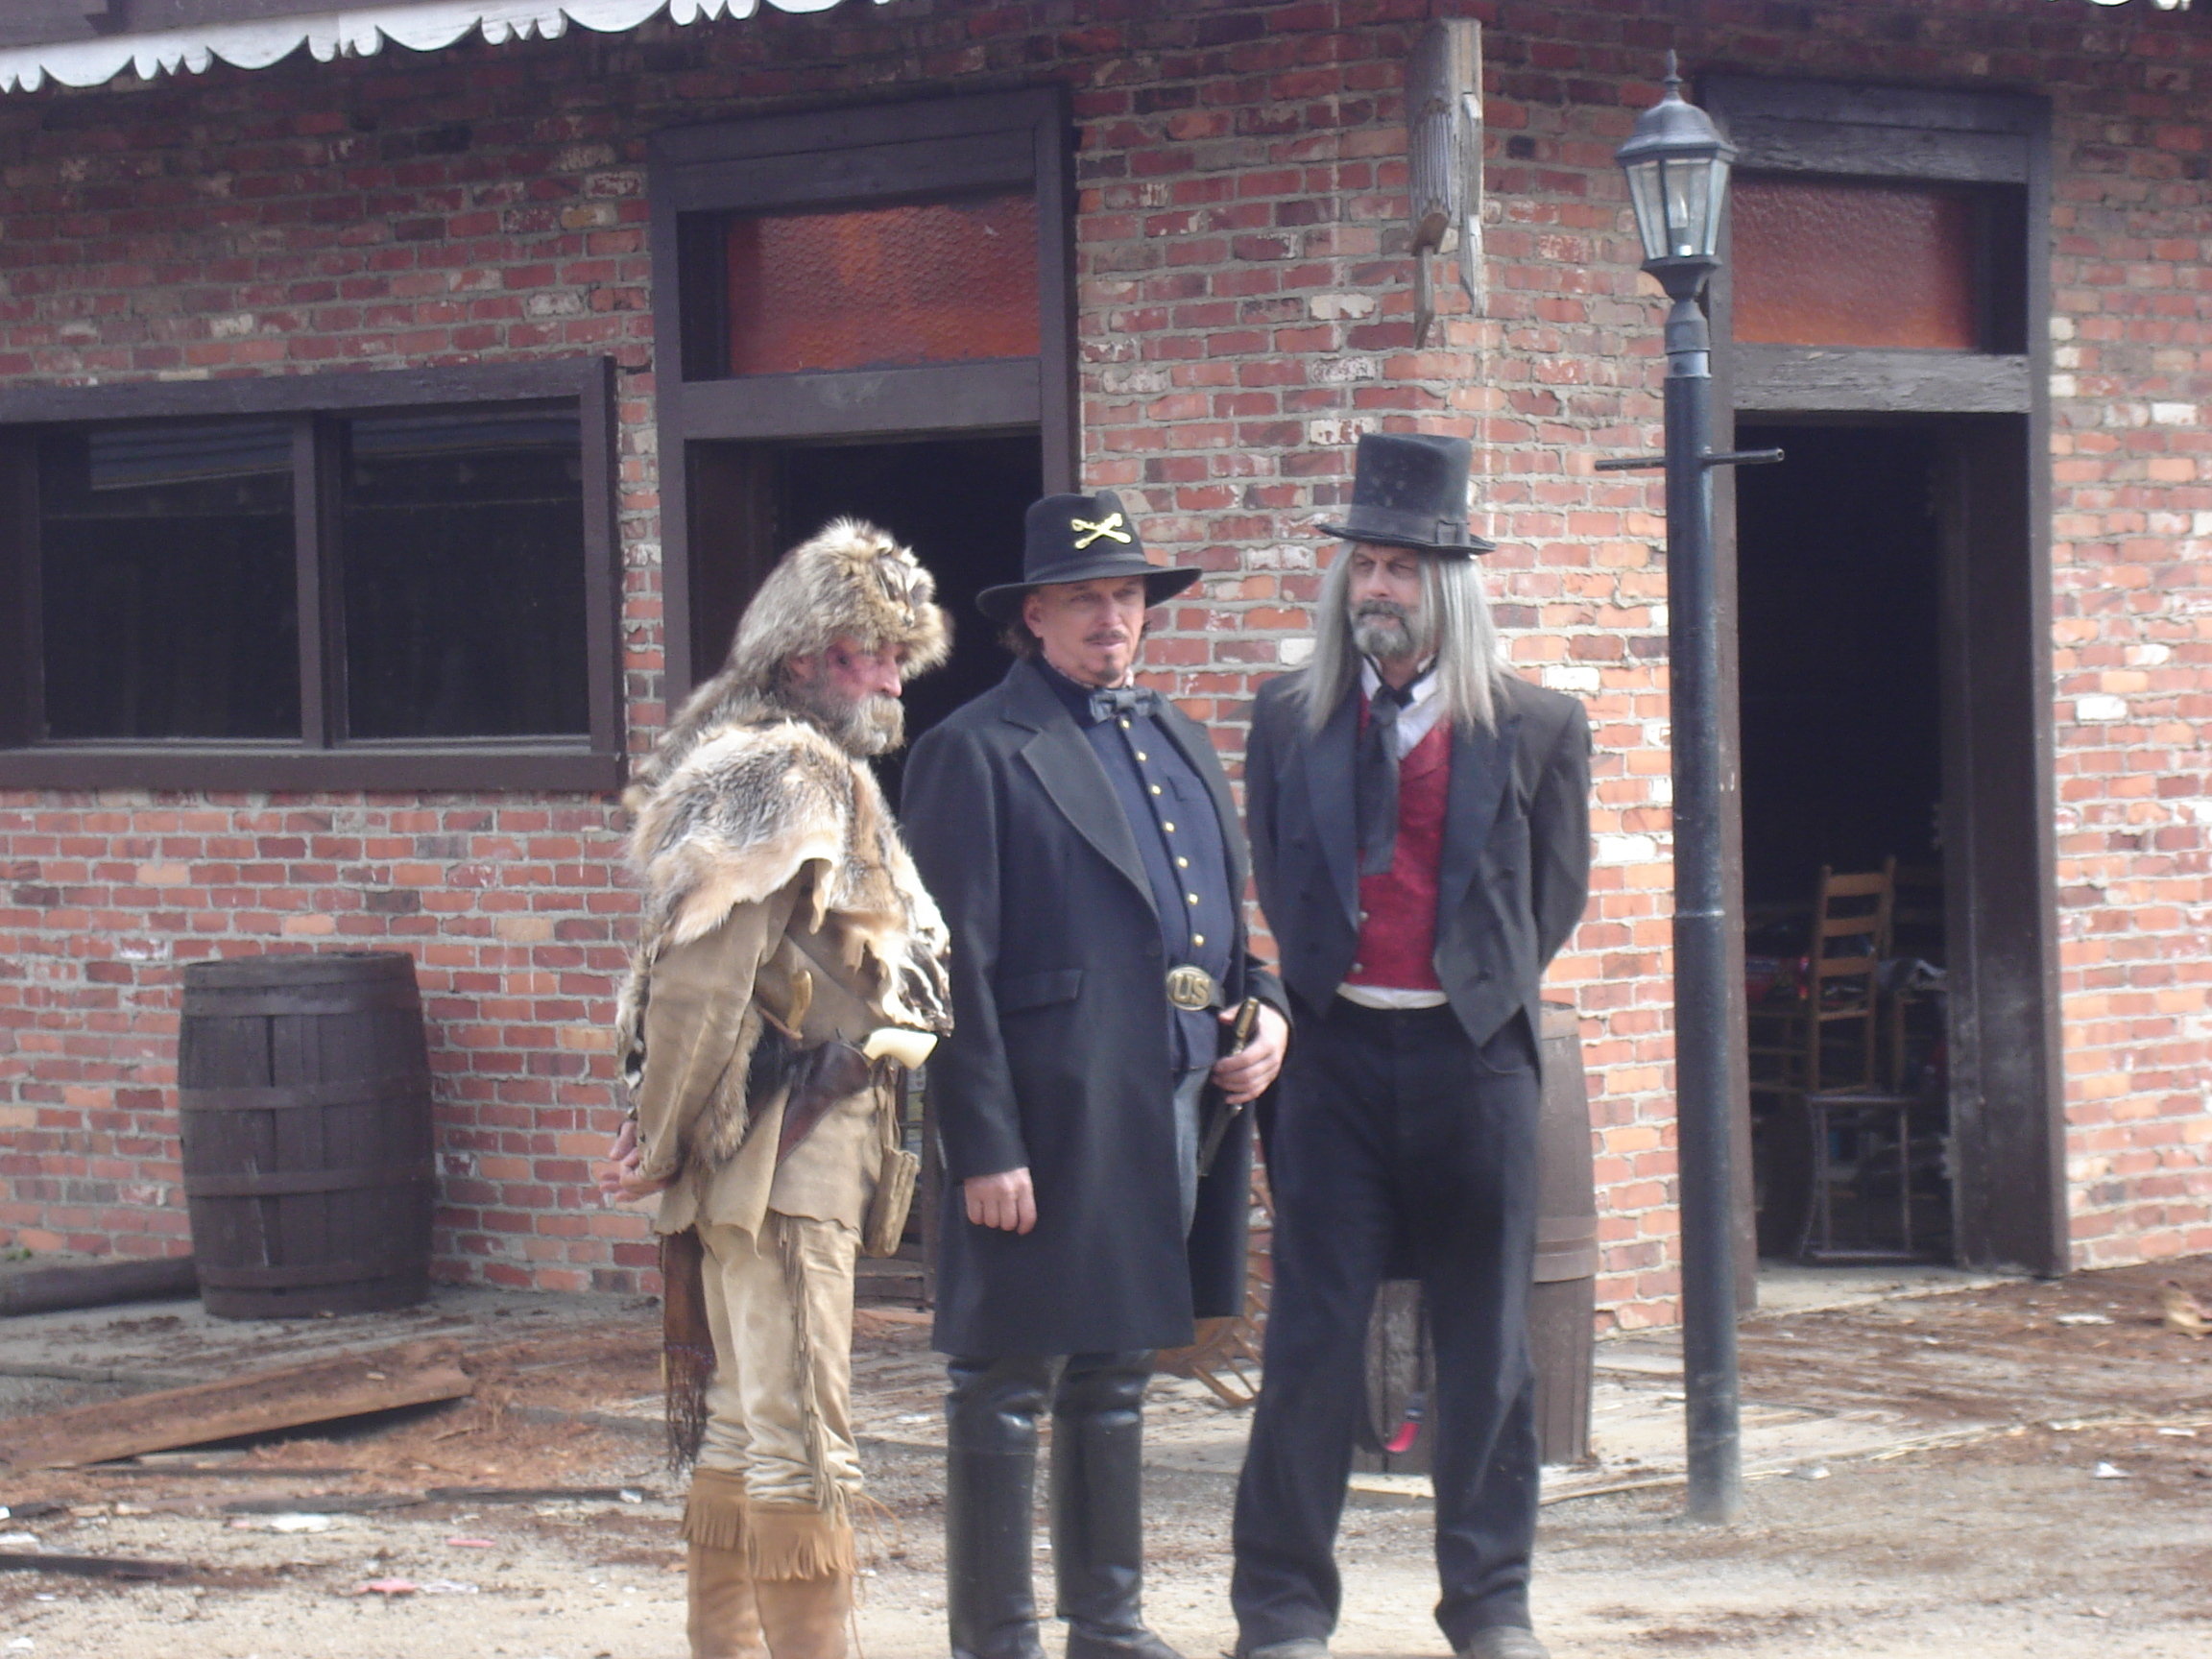 From left, actors Tommy Dippel (The Alamo, Ride with the Devil), Anthony Hornus (An Ordinary Killer, Miracle at Sage Creek)and Dean Teaster (Figure in the Forest, Heaven's Neighbors), discuss a scene for Ghost Town, filmed in Maggie Valley, North Carolina